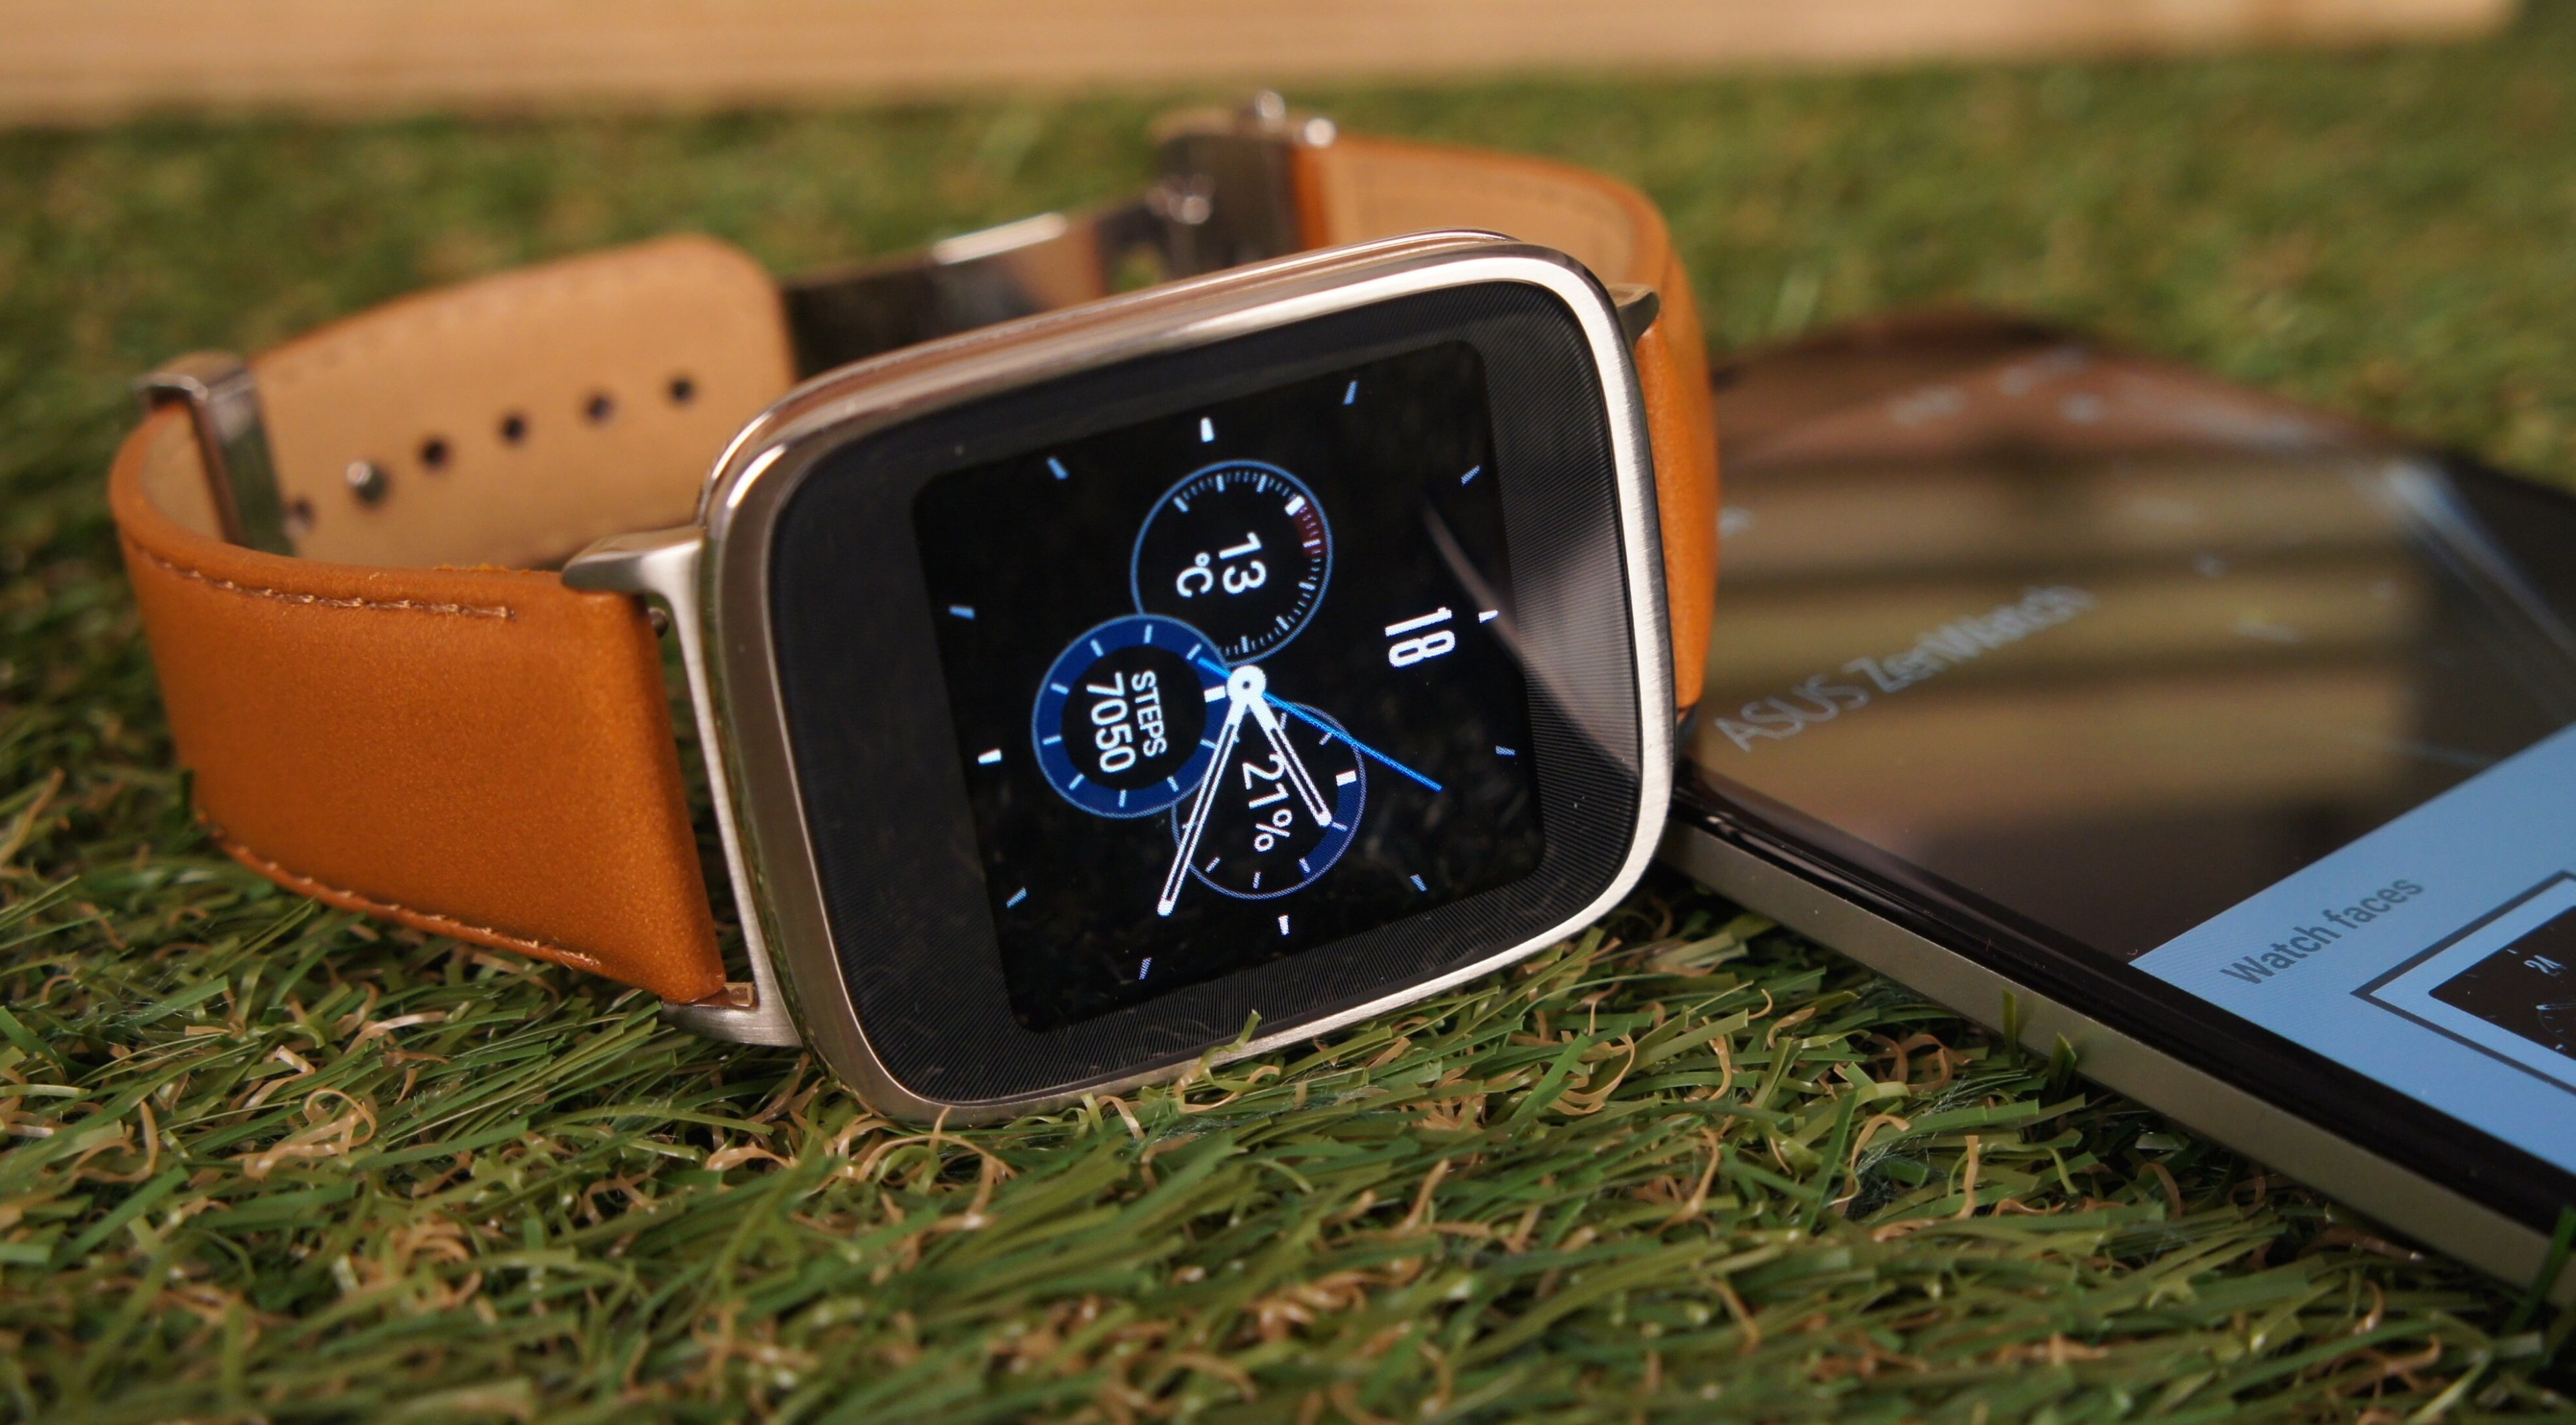 asus zenwatch 2 4k pc, grass, plant, technology, time, clock